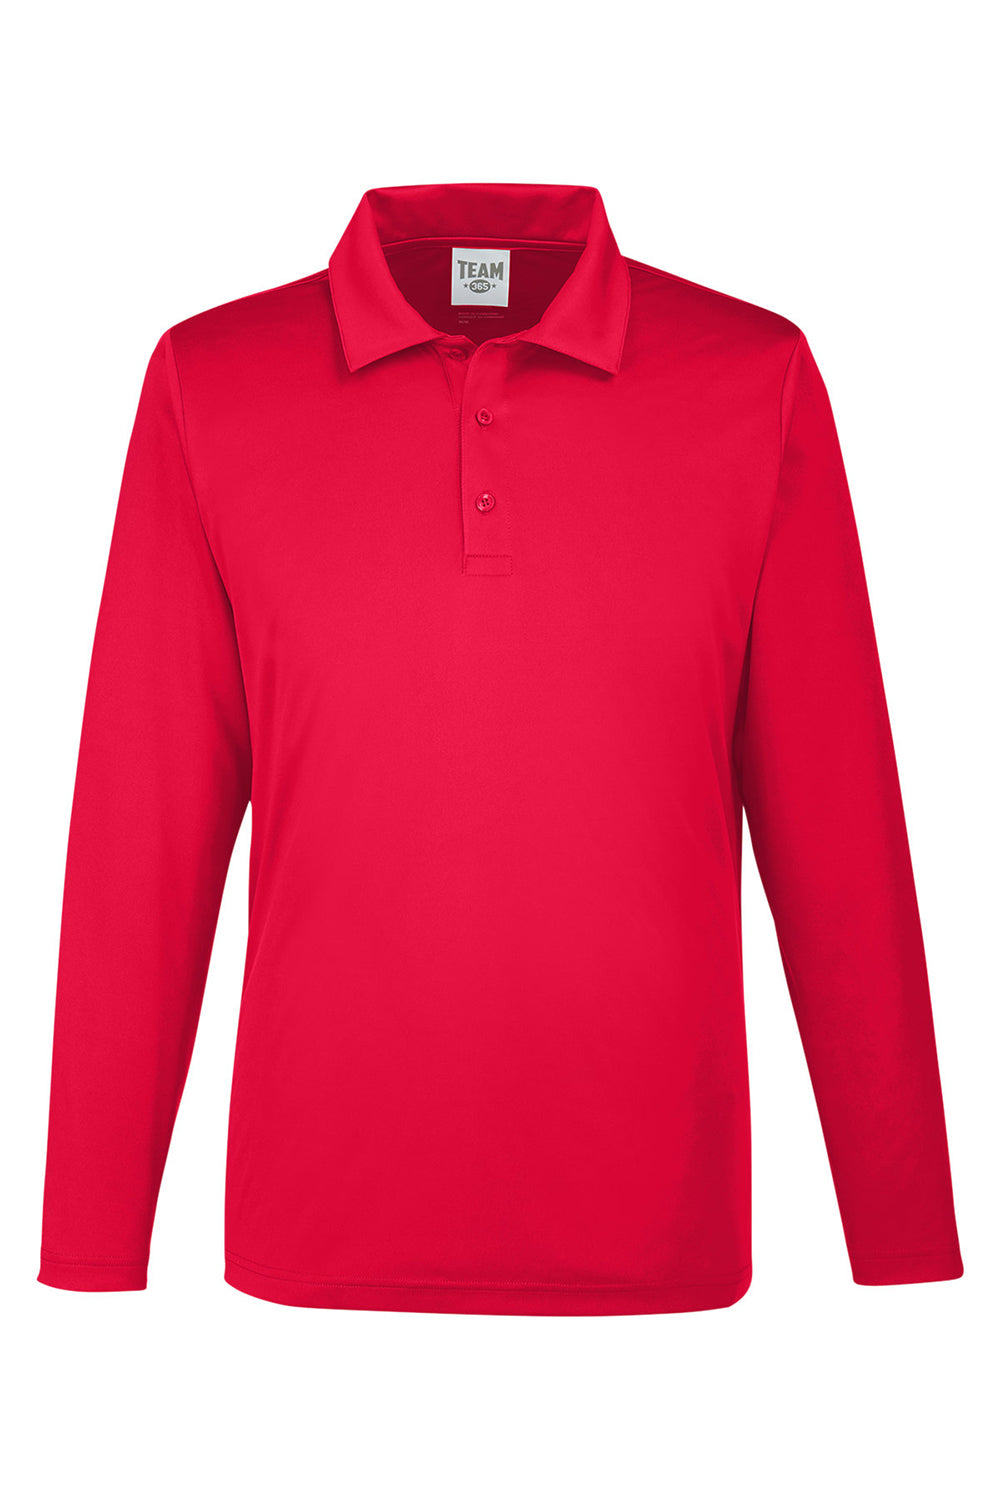 Team 365 TT51L Mens Zone Sonic Moisture Wicking Long Sleeve Polo Shirt Red Flat Front